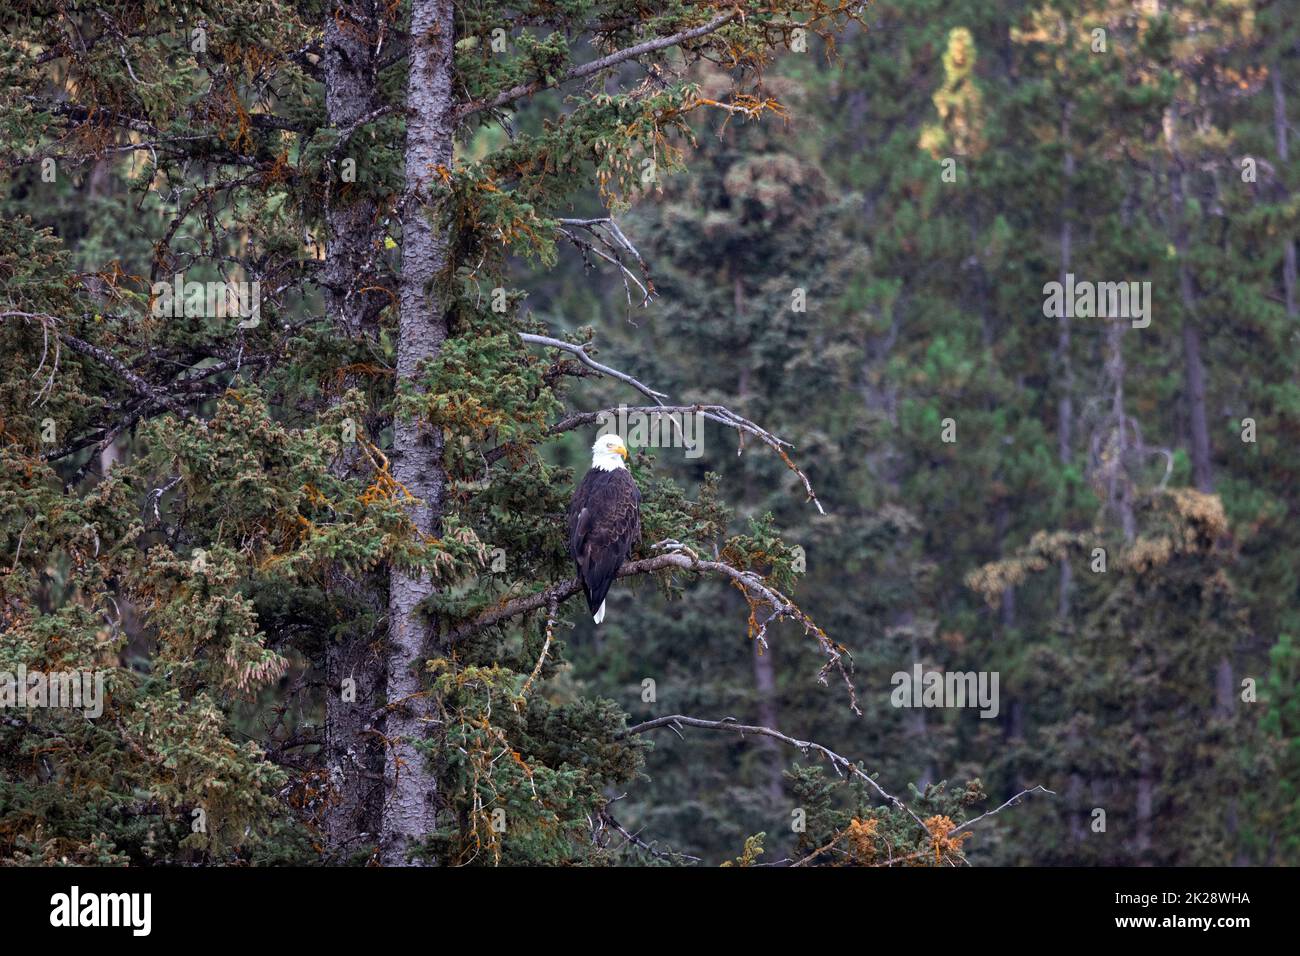 Adult Bald Eagle Perched in Pine Tree Stock Photo